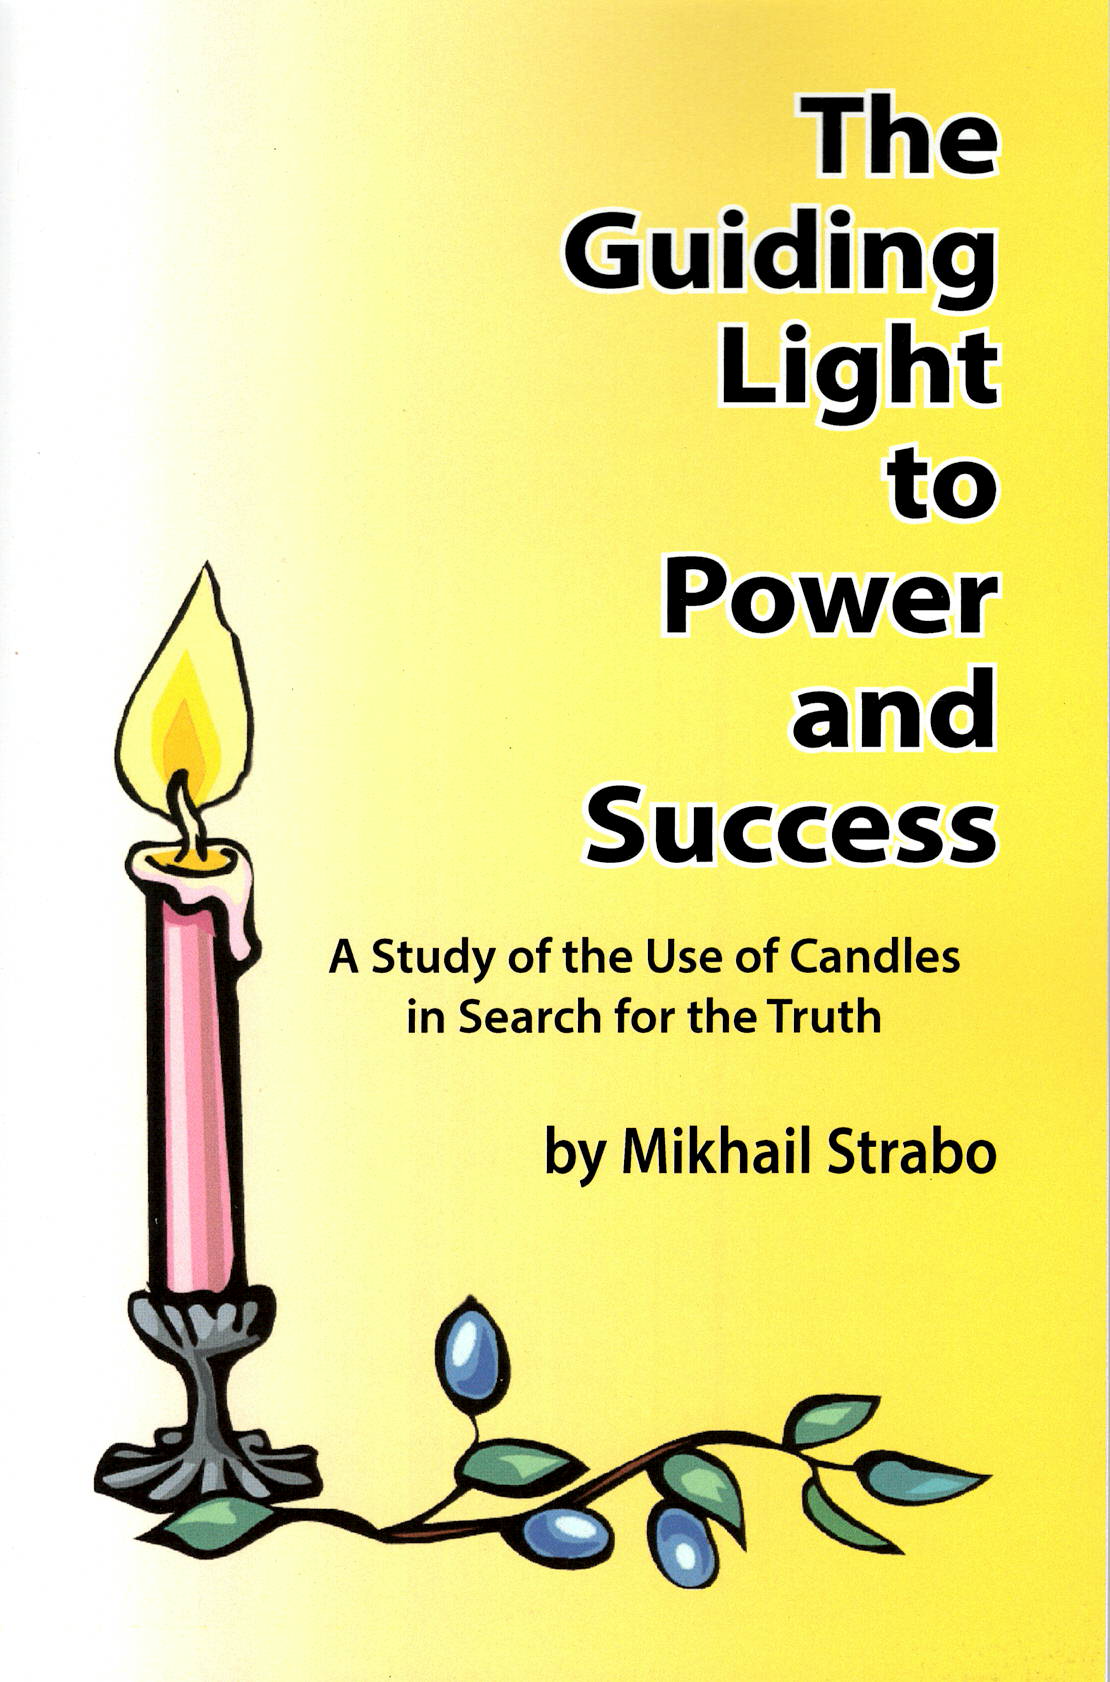 Guiding Light To Power & Success, by Mikhail Strabo